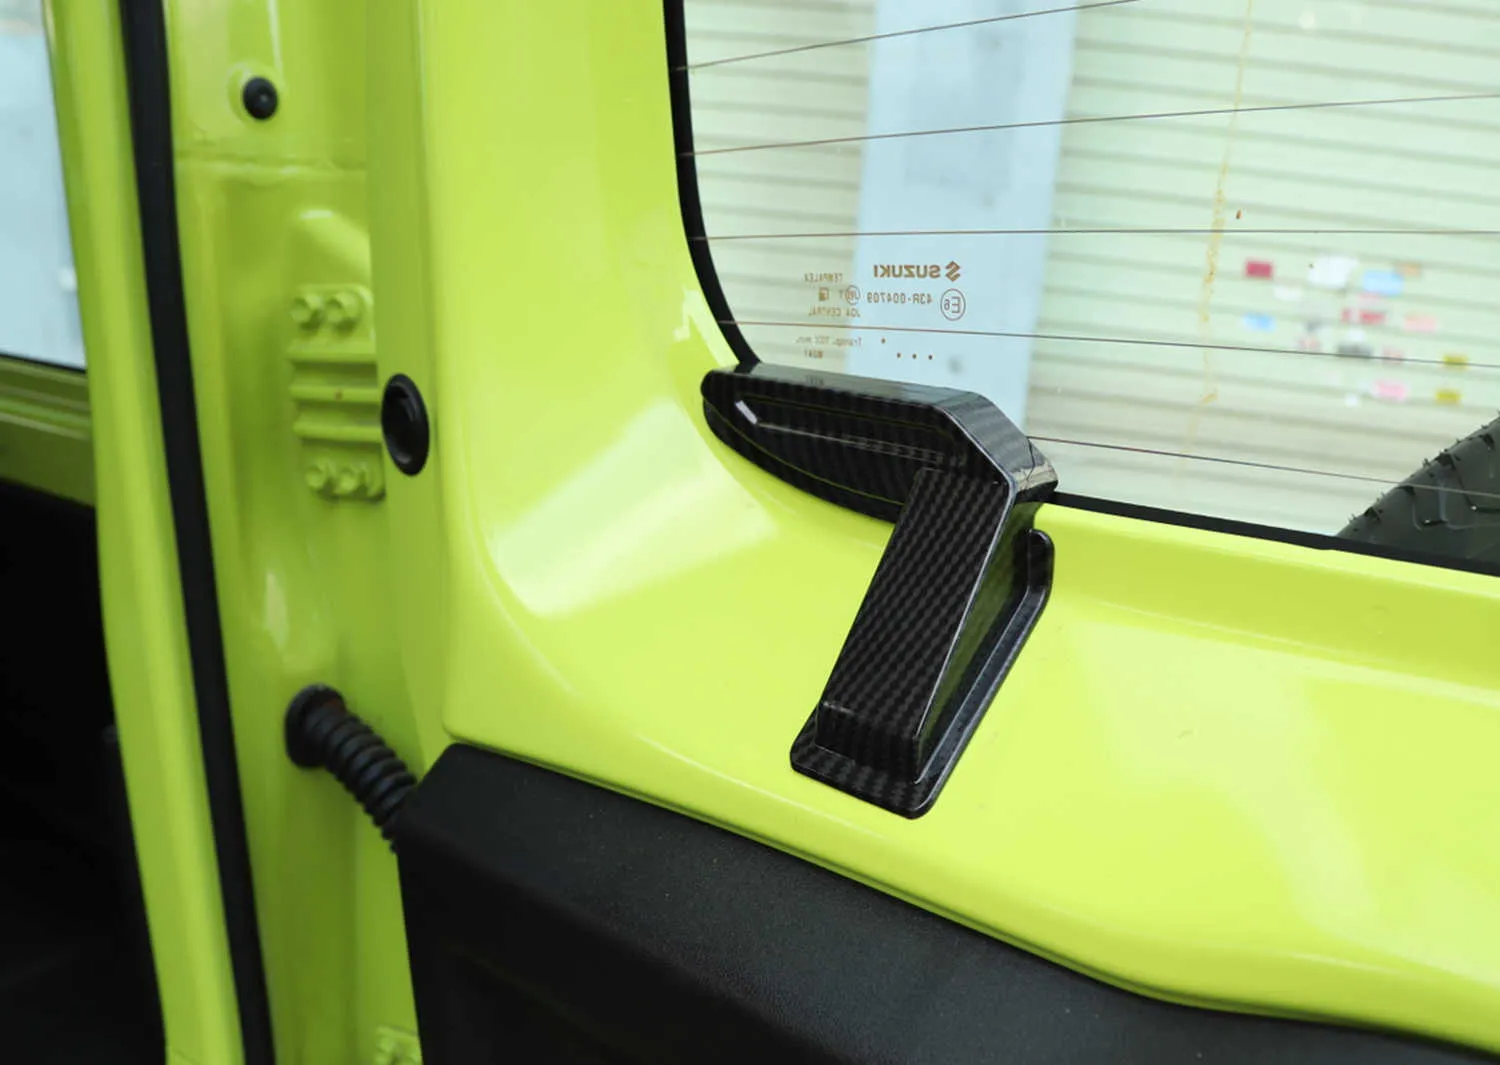 Rear Windshield Heating Wire Protection Cover For Suzuki Jimny